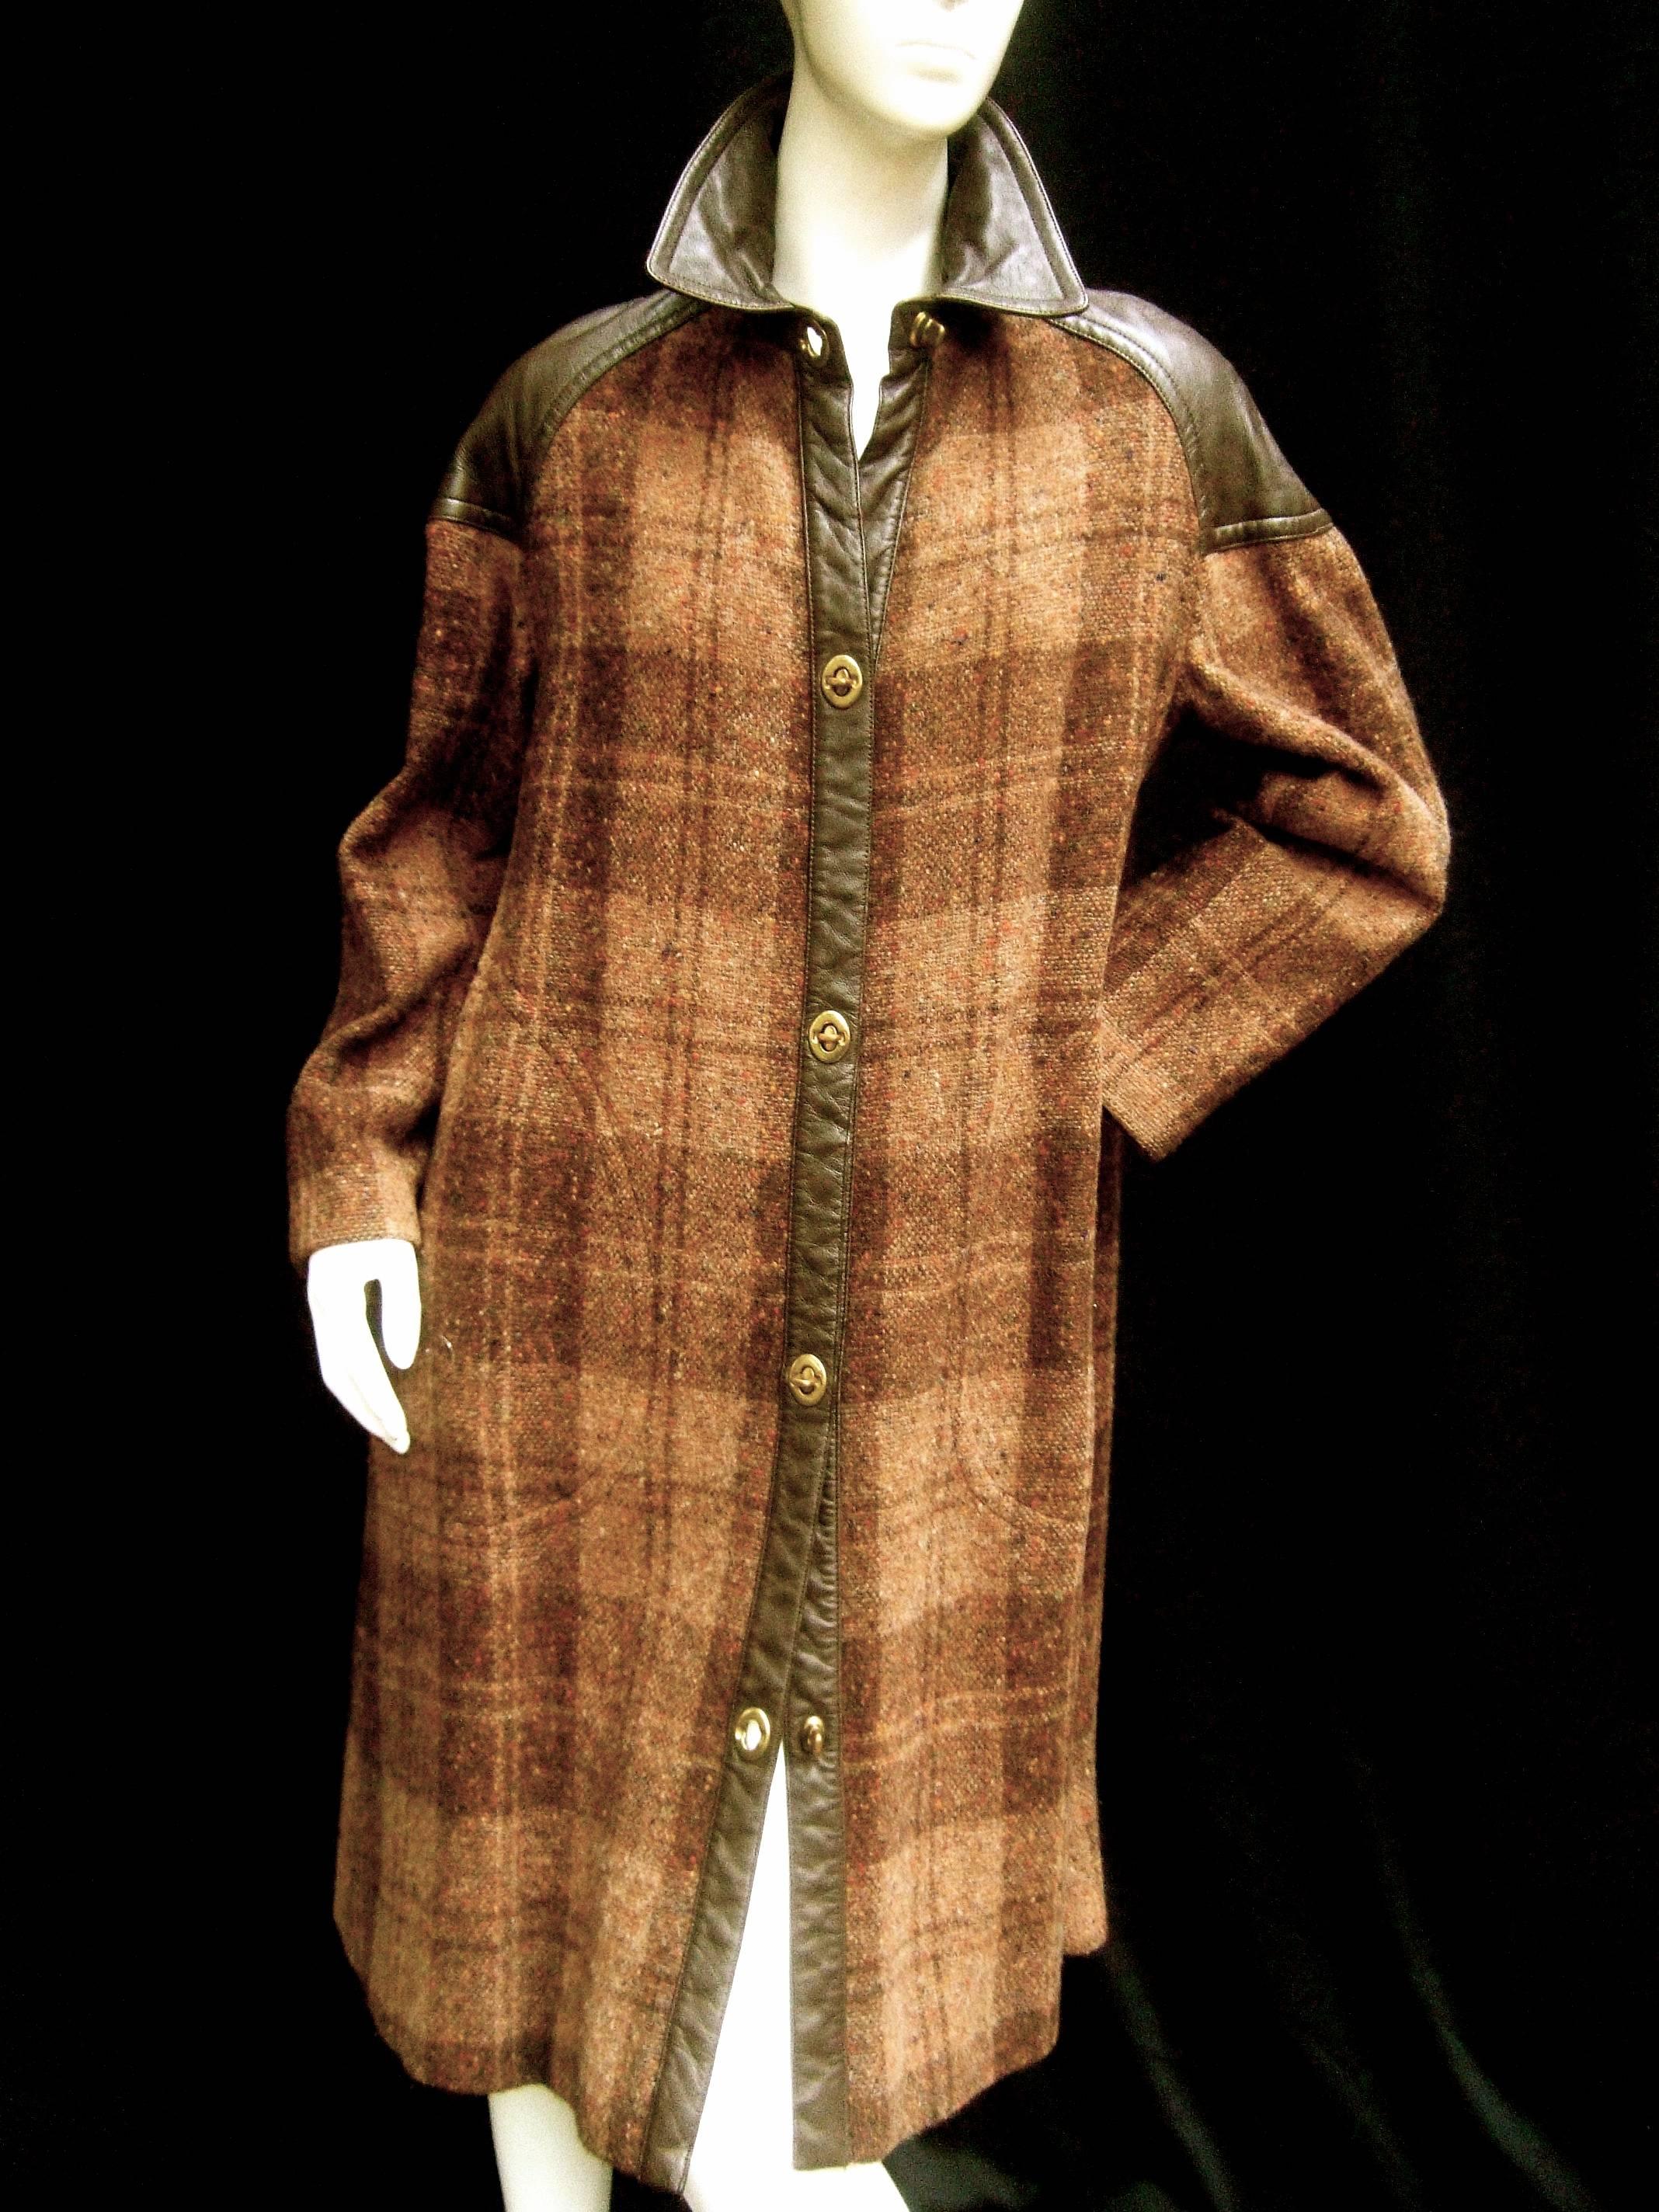 1970s Brown plaid leather trim wool coat 
The classic coat is designed with two tone
brown window pane wool; accented with 
chocolate brown leather trim on the collar,
shoulders, trim on the opening that extends 
to the pockets 

The unique